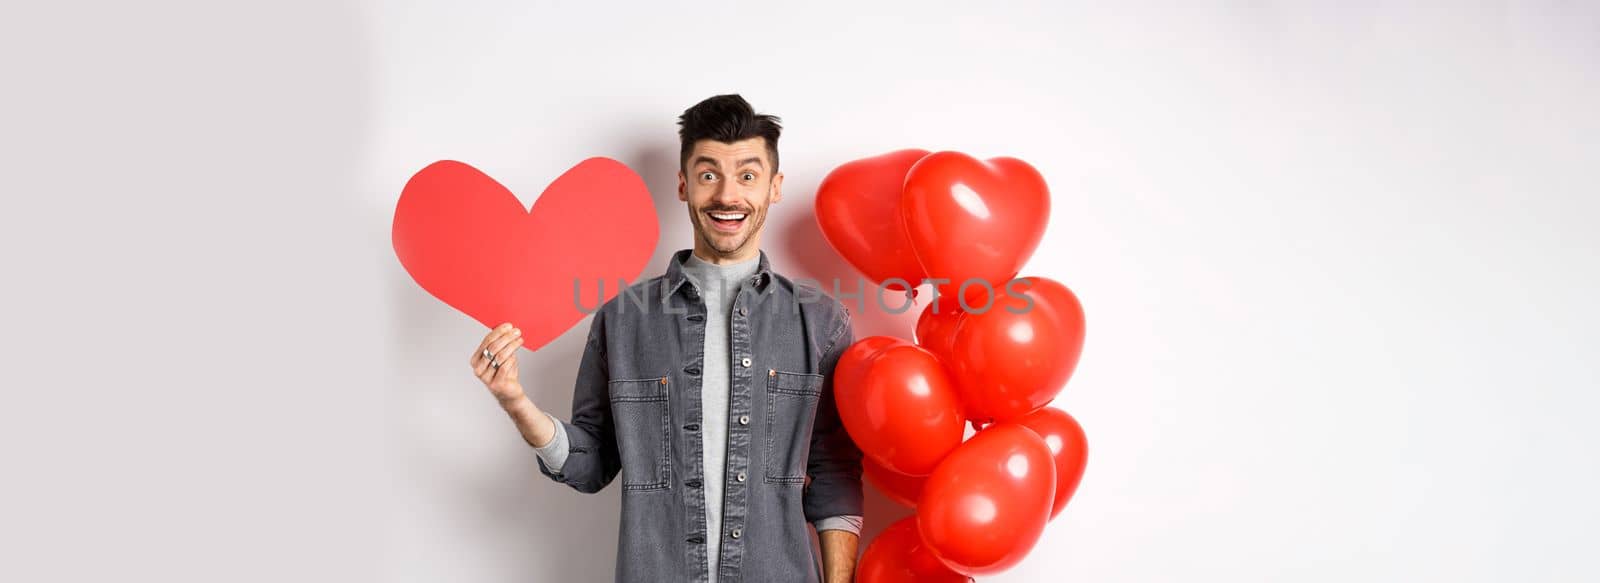 Valentines day and love concept. Cheerful funny guy showing heart cutout, standing near romantic balloons and smiling excited at camera, white background.